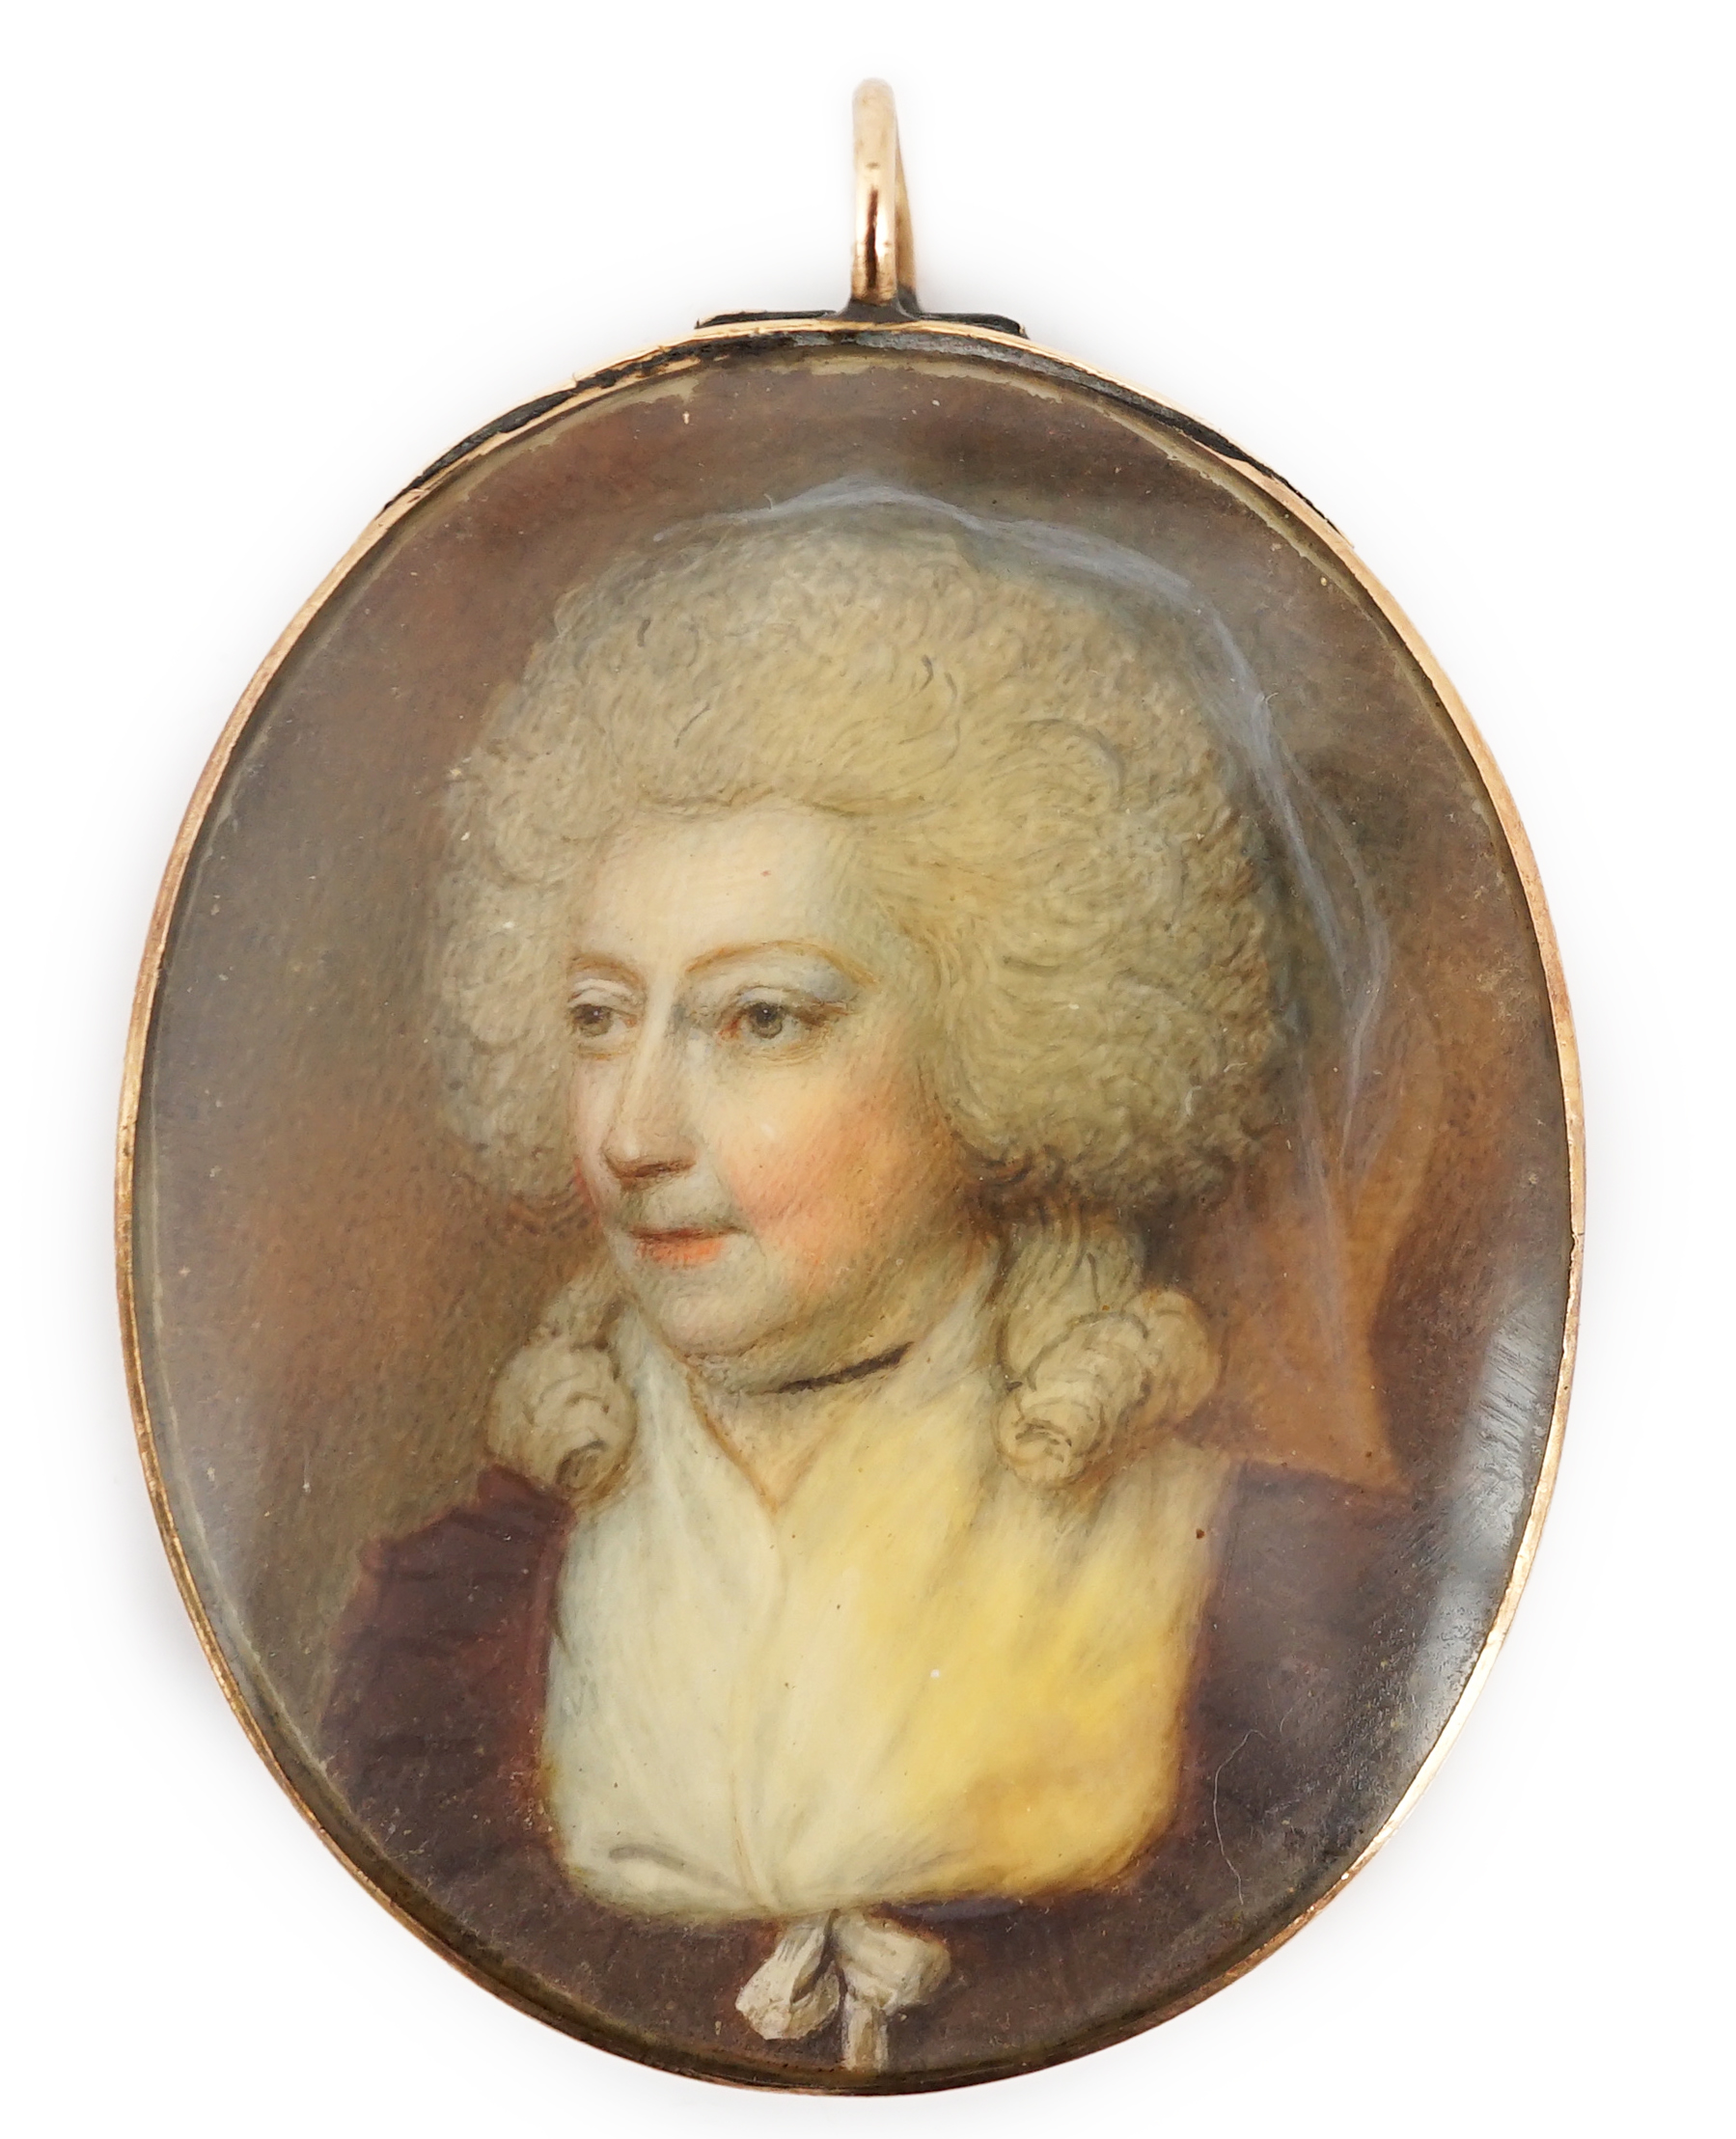 Attributed to John Bogle (British, 1746-1803), Portrait miniature of a lady, oil on ivory, 4.5 x 3.7cm. CITES Submission reference HW3B76TH